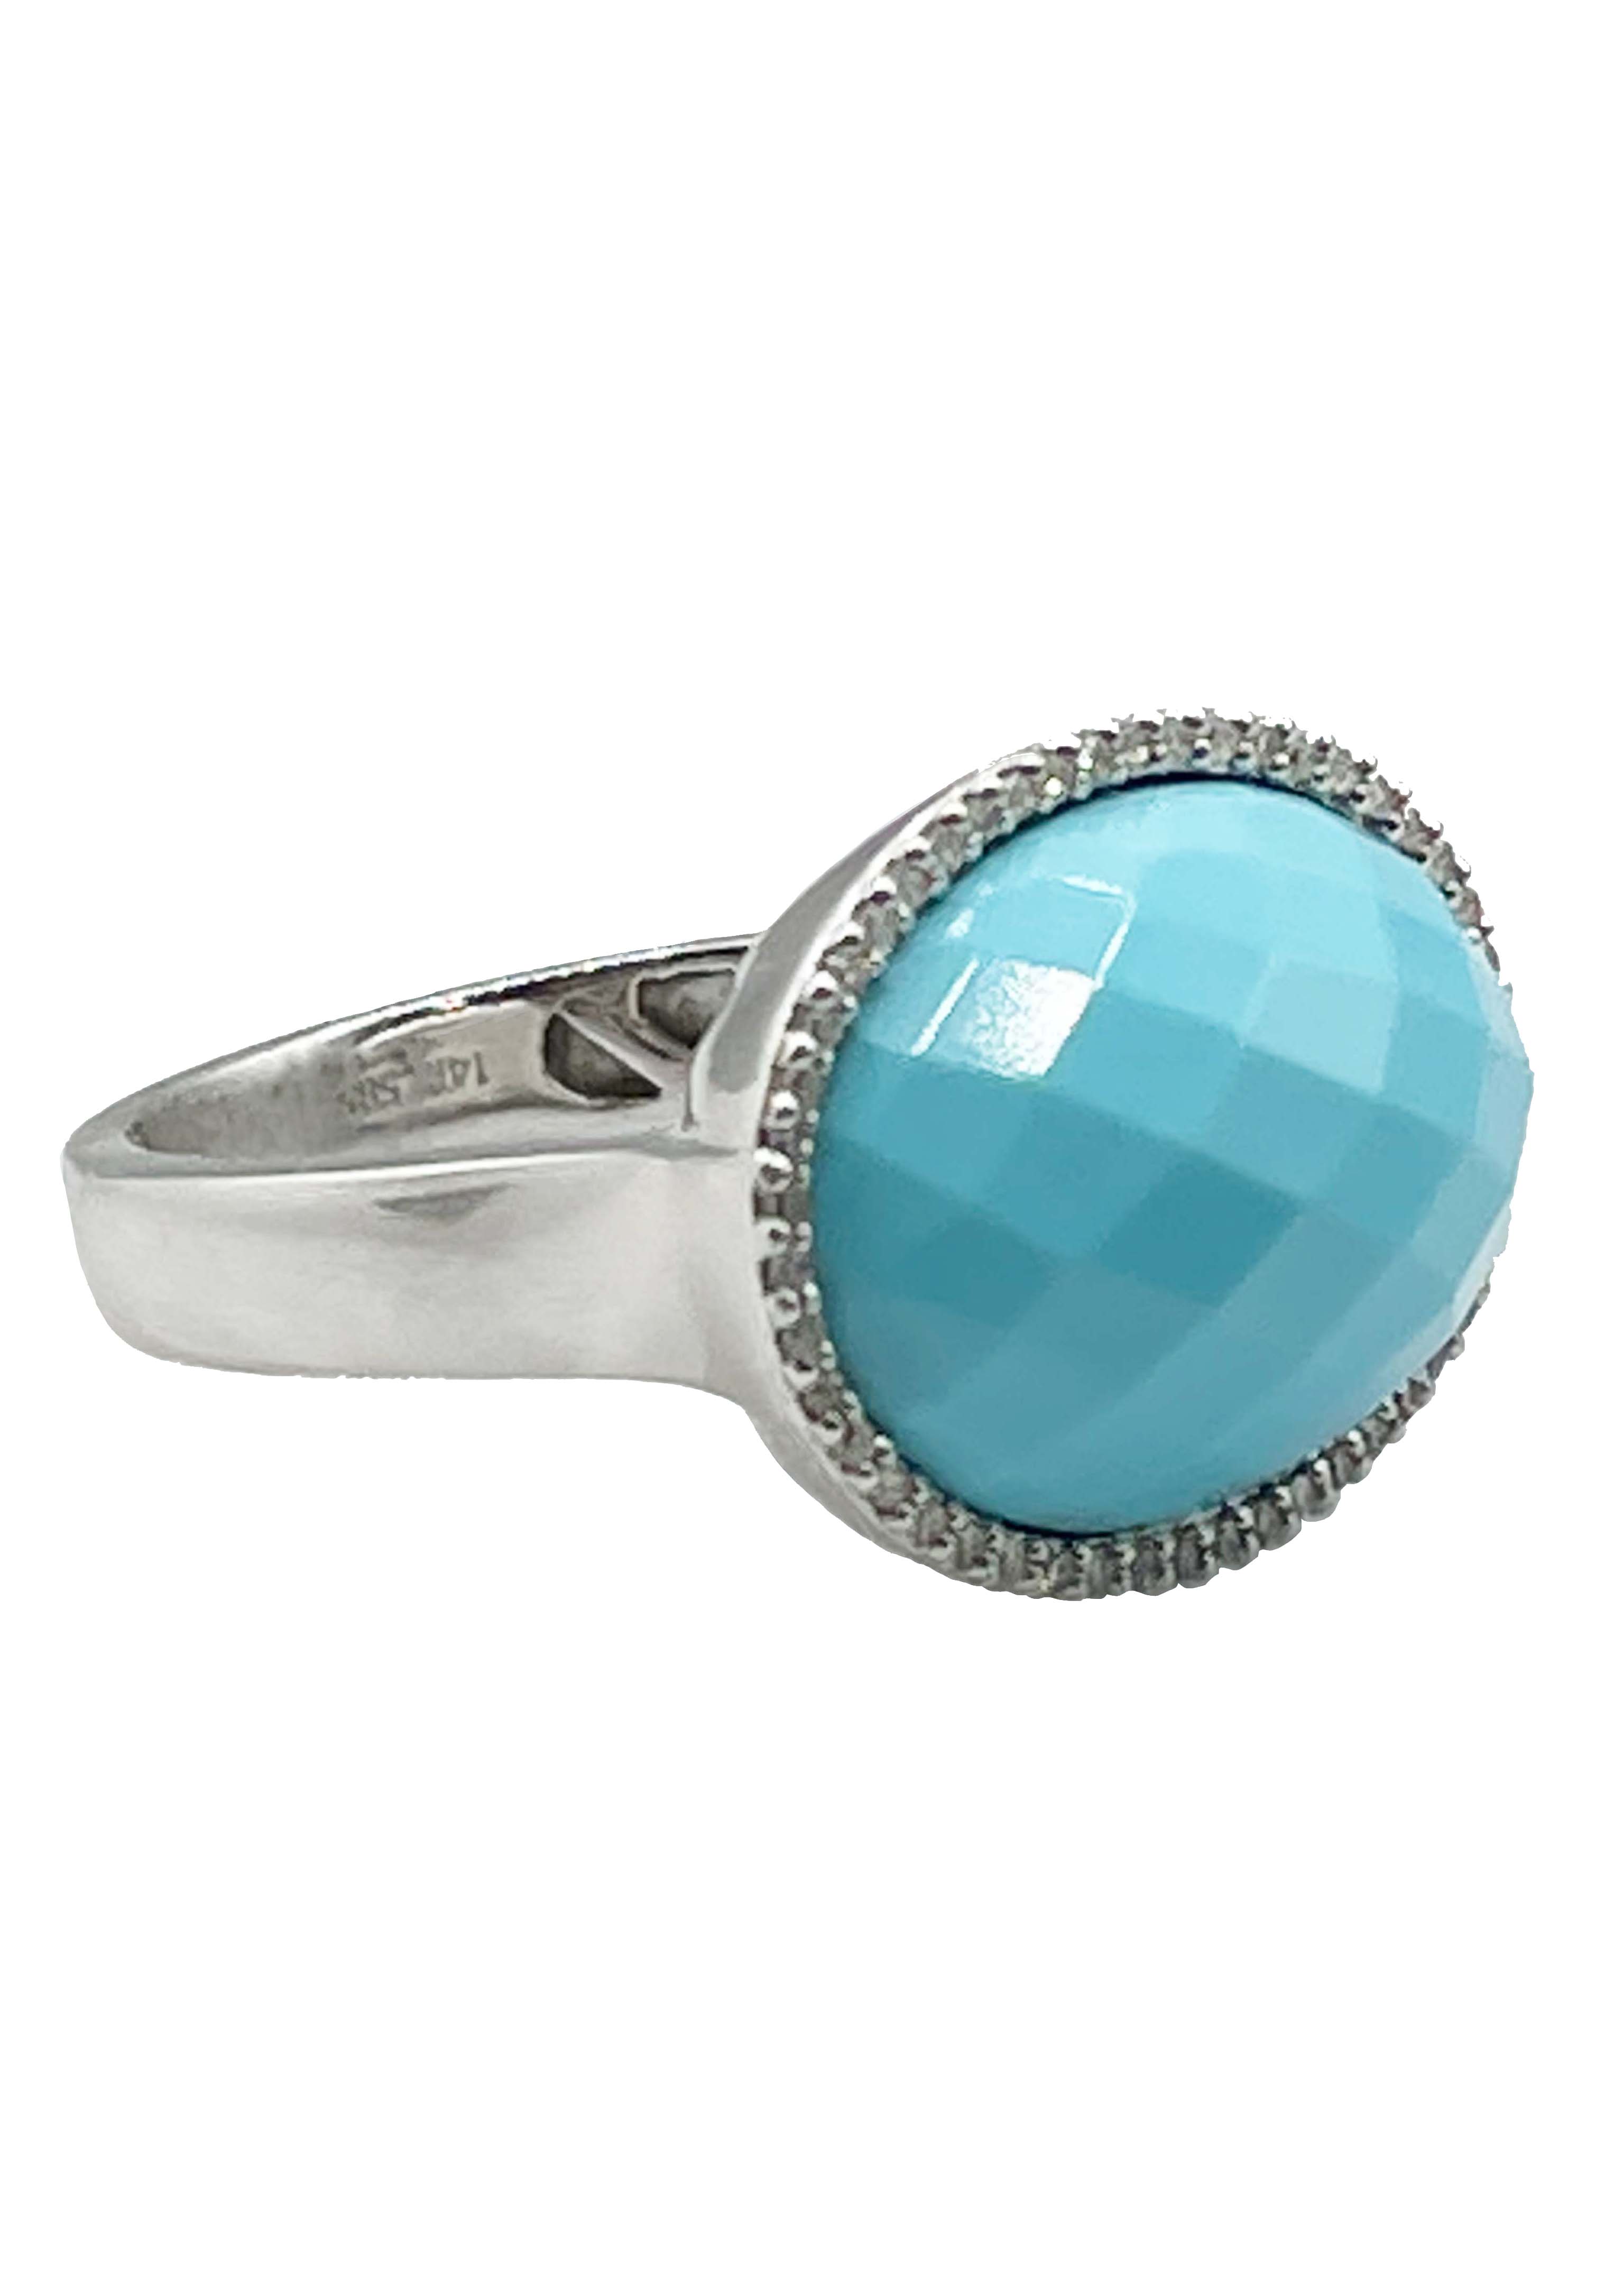 14K WHITE GOLD OVAL TURQUOISE RING WITH DIAMONDS Image